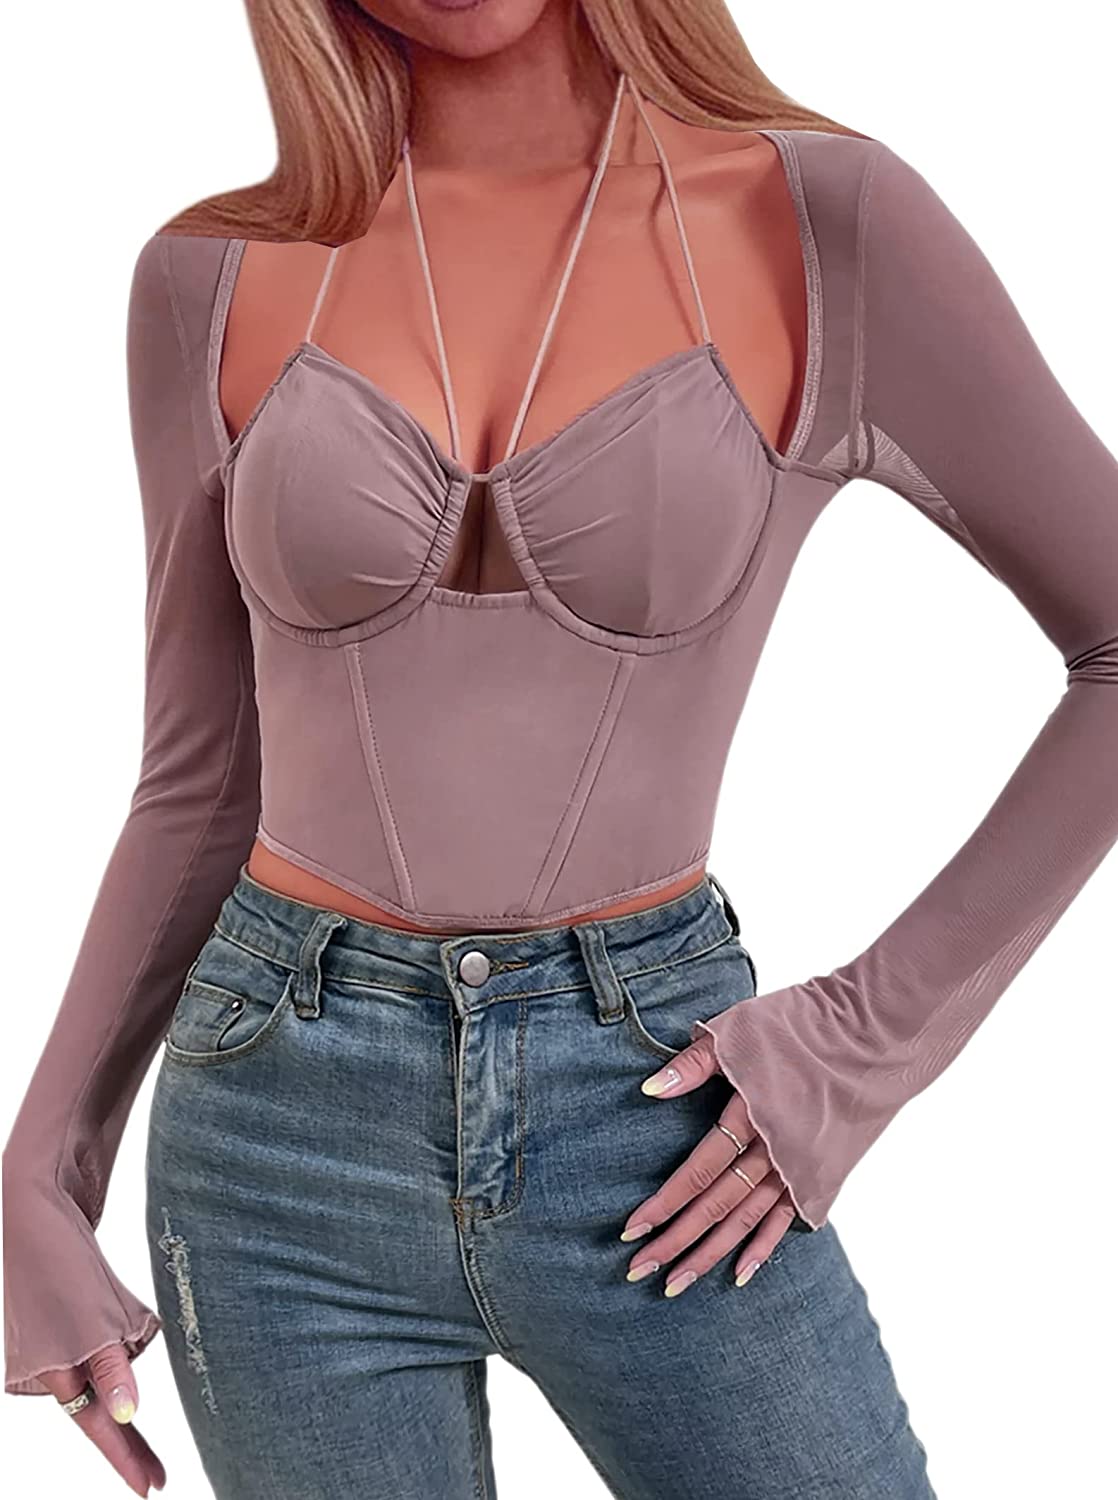 DanceeMangoos Womens Long Sleeve Corset Top Sexy Mesh Sheer Crop Tops Going Out Party Clubwear - image 1 of 7